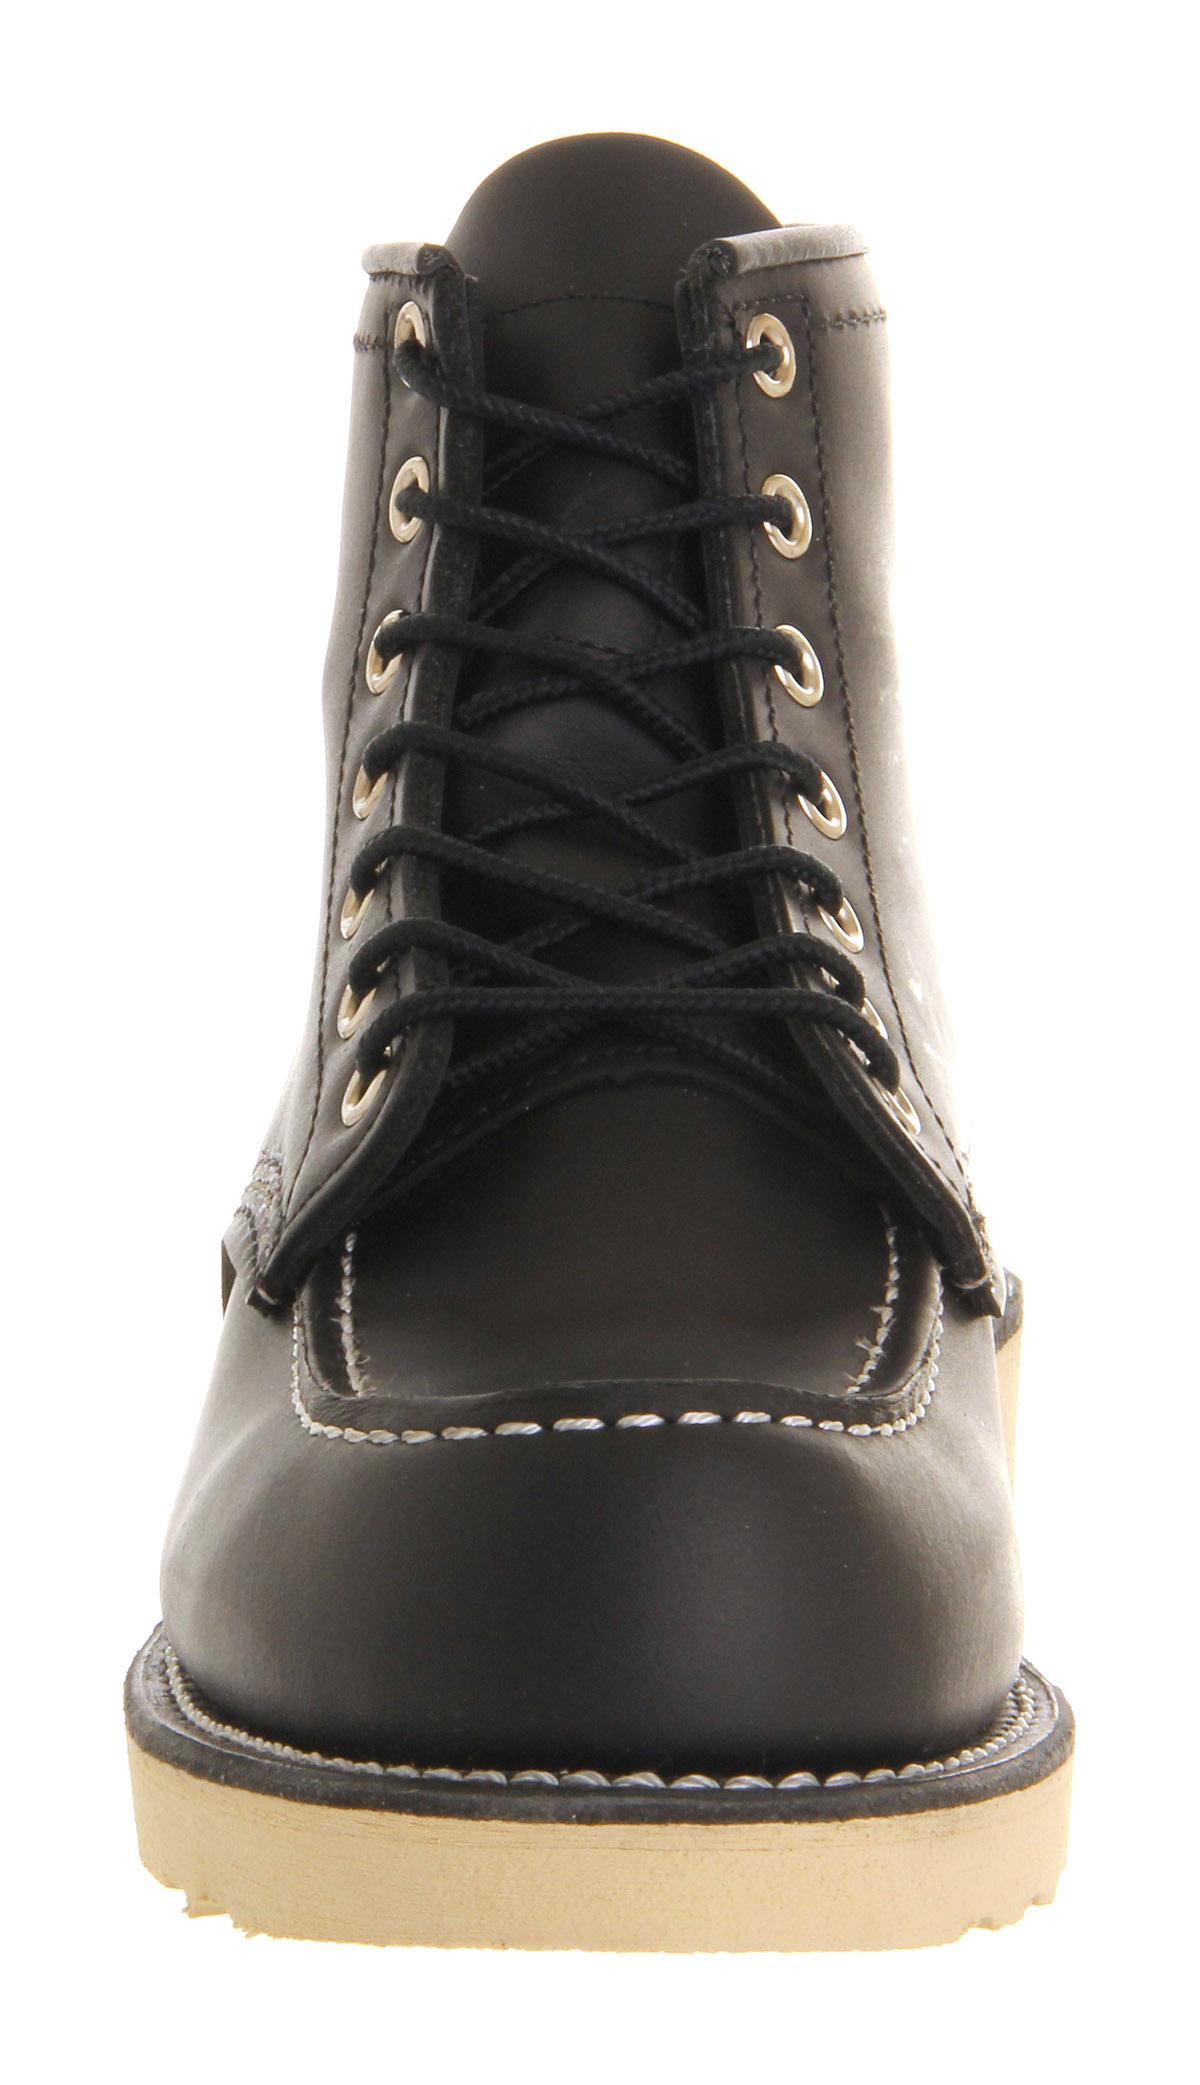 Red wing 6 Inch Moc Toe Boots in Black | Lyst